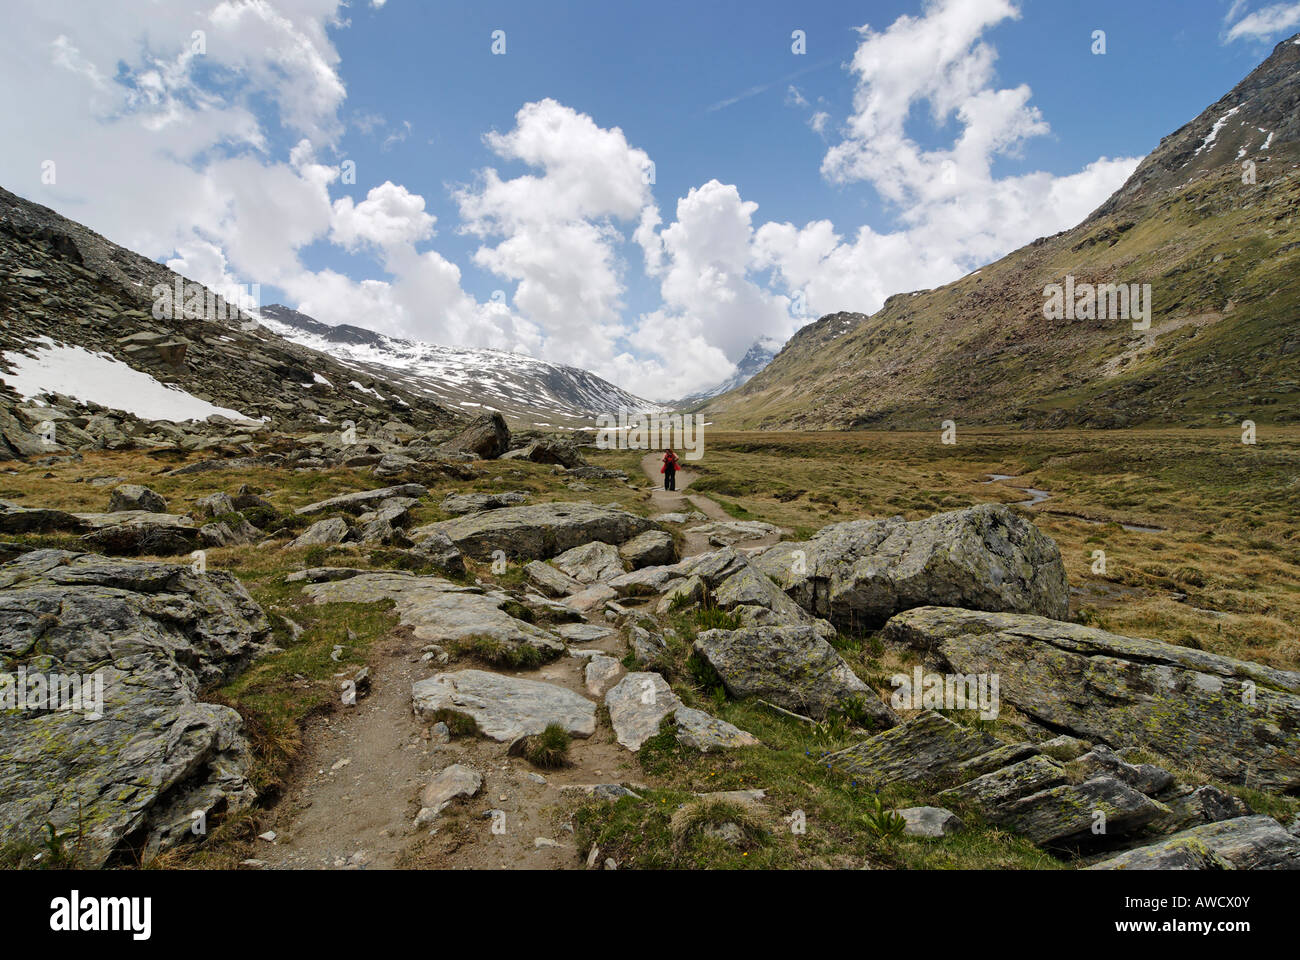 Gran Paradiso National Park between Piemonte Piedmont and Aosta valley Italy Garian Alps at the old path to the Val Salvarenche Stock Photo